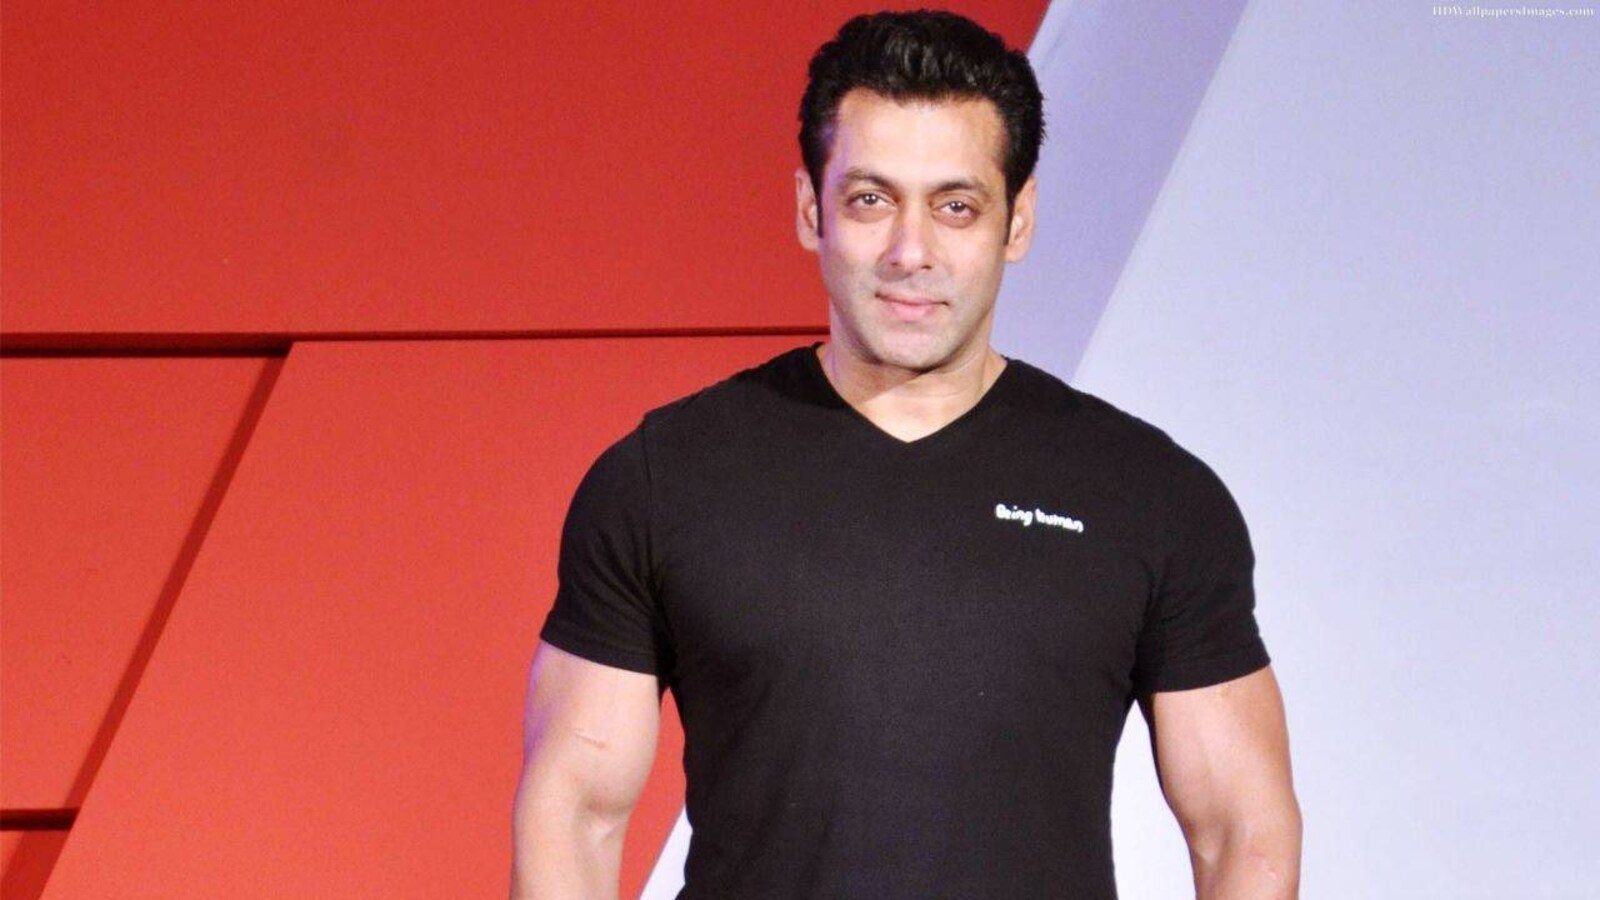 Salman Khan - All fashion brands are about looking good.